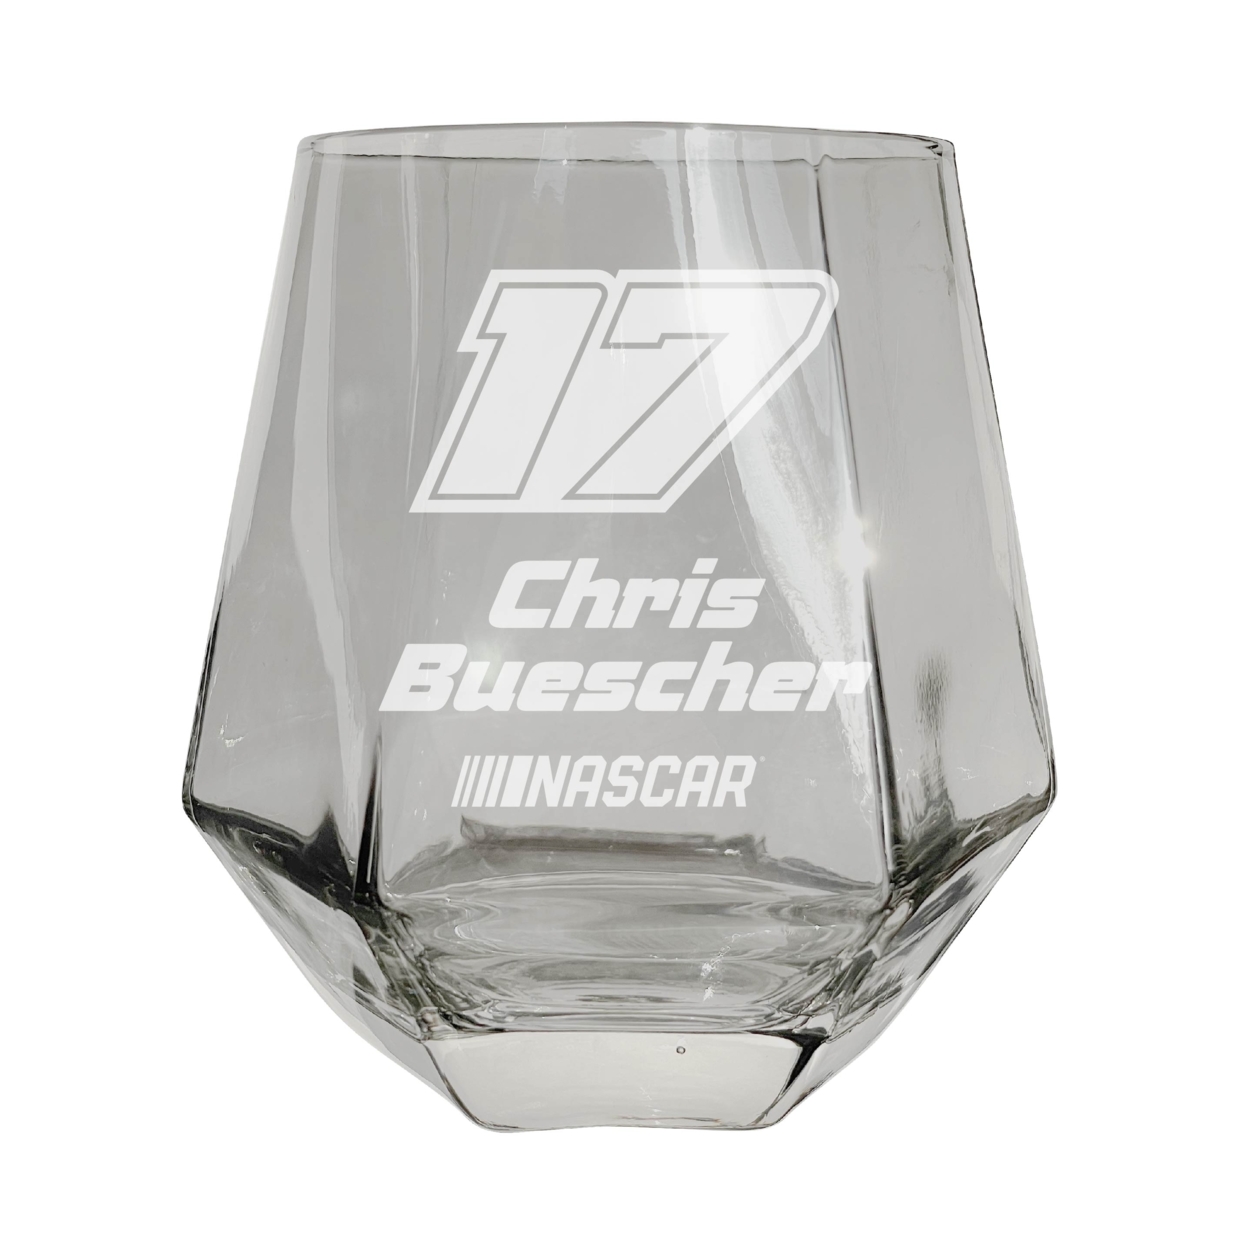 #17 Chris Buescher Officially Licensed 10 Oz Engraved Diamond Wine Glass - Clear, Single